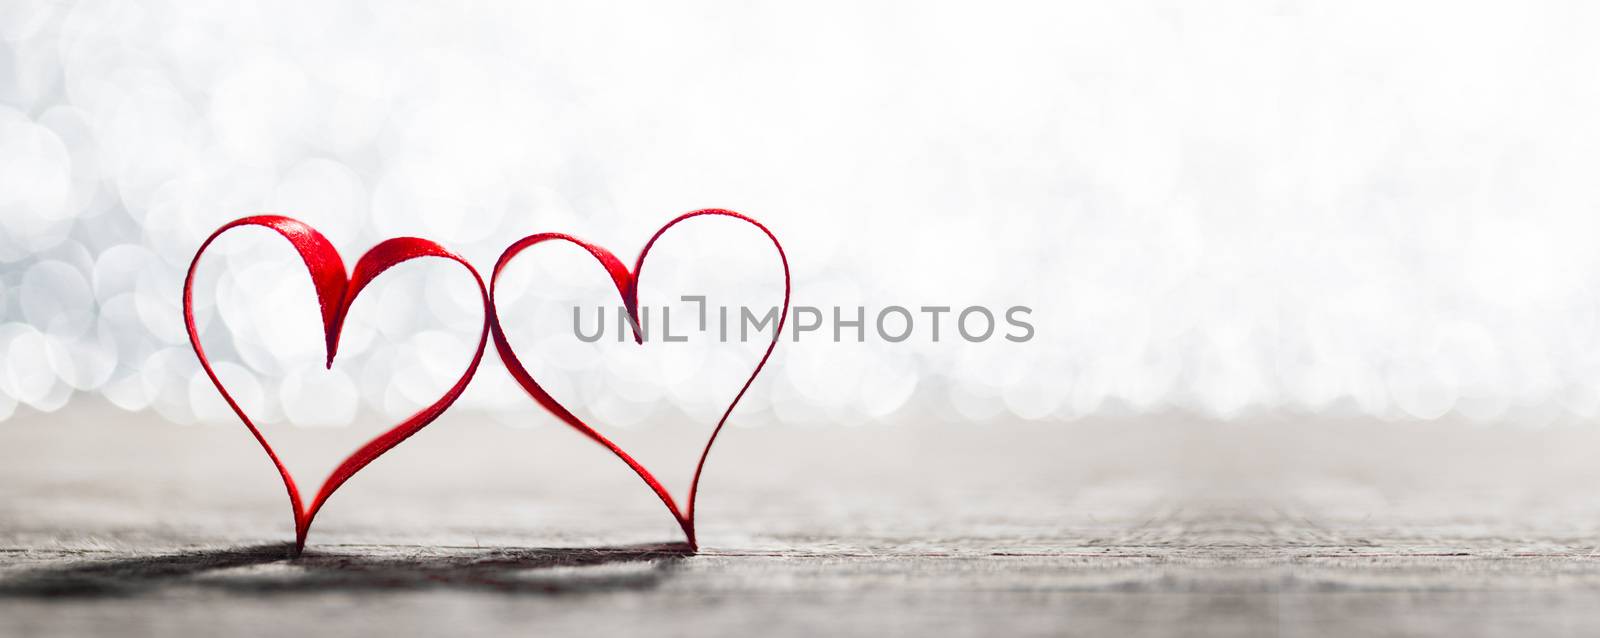 Red hearts symbol of love by Yellowj